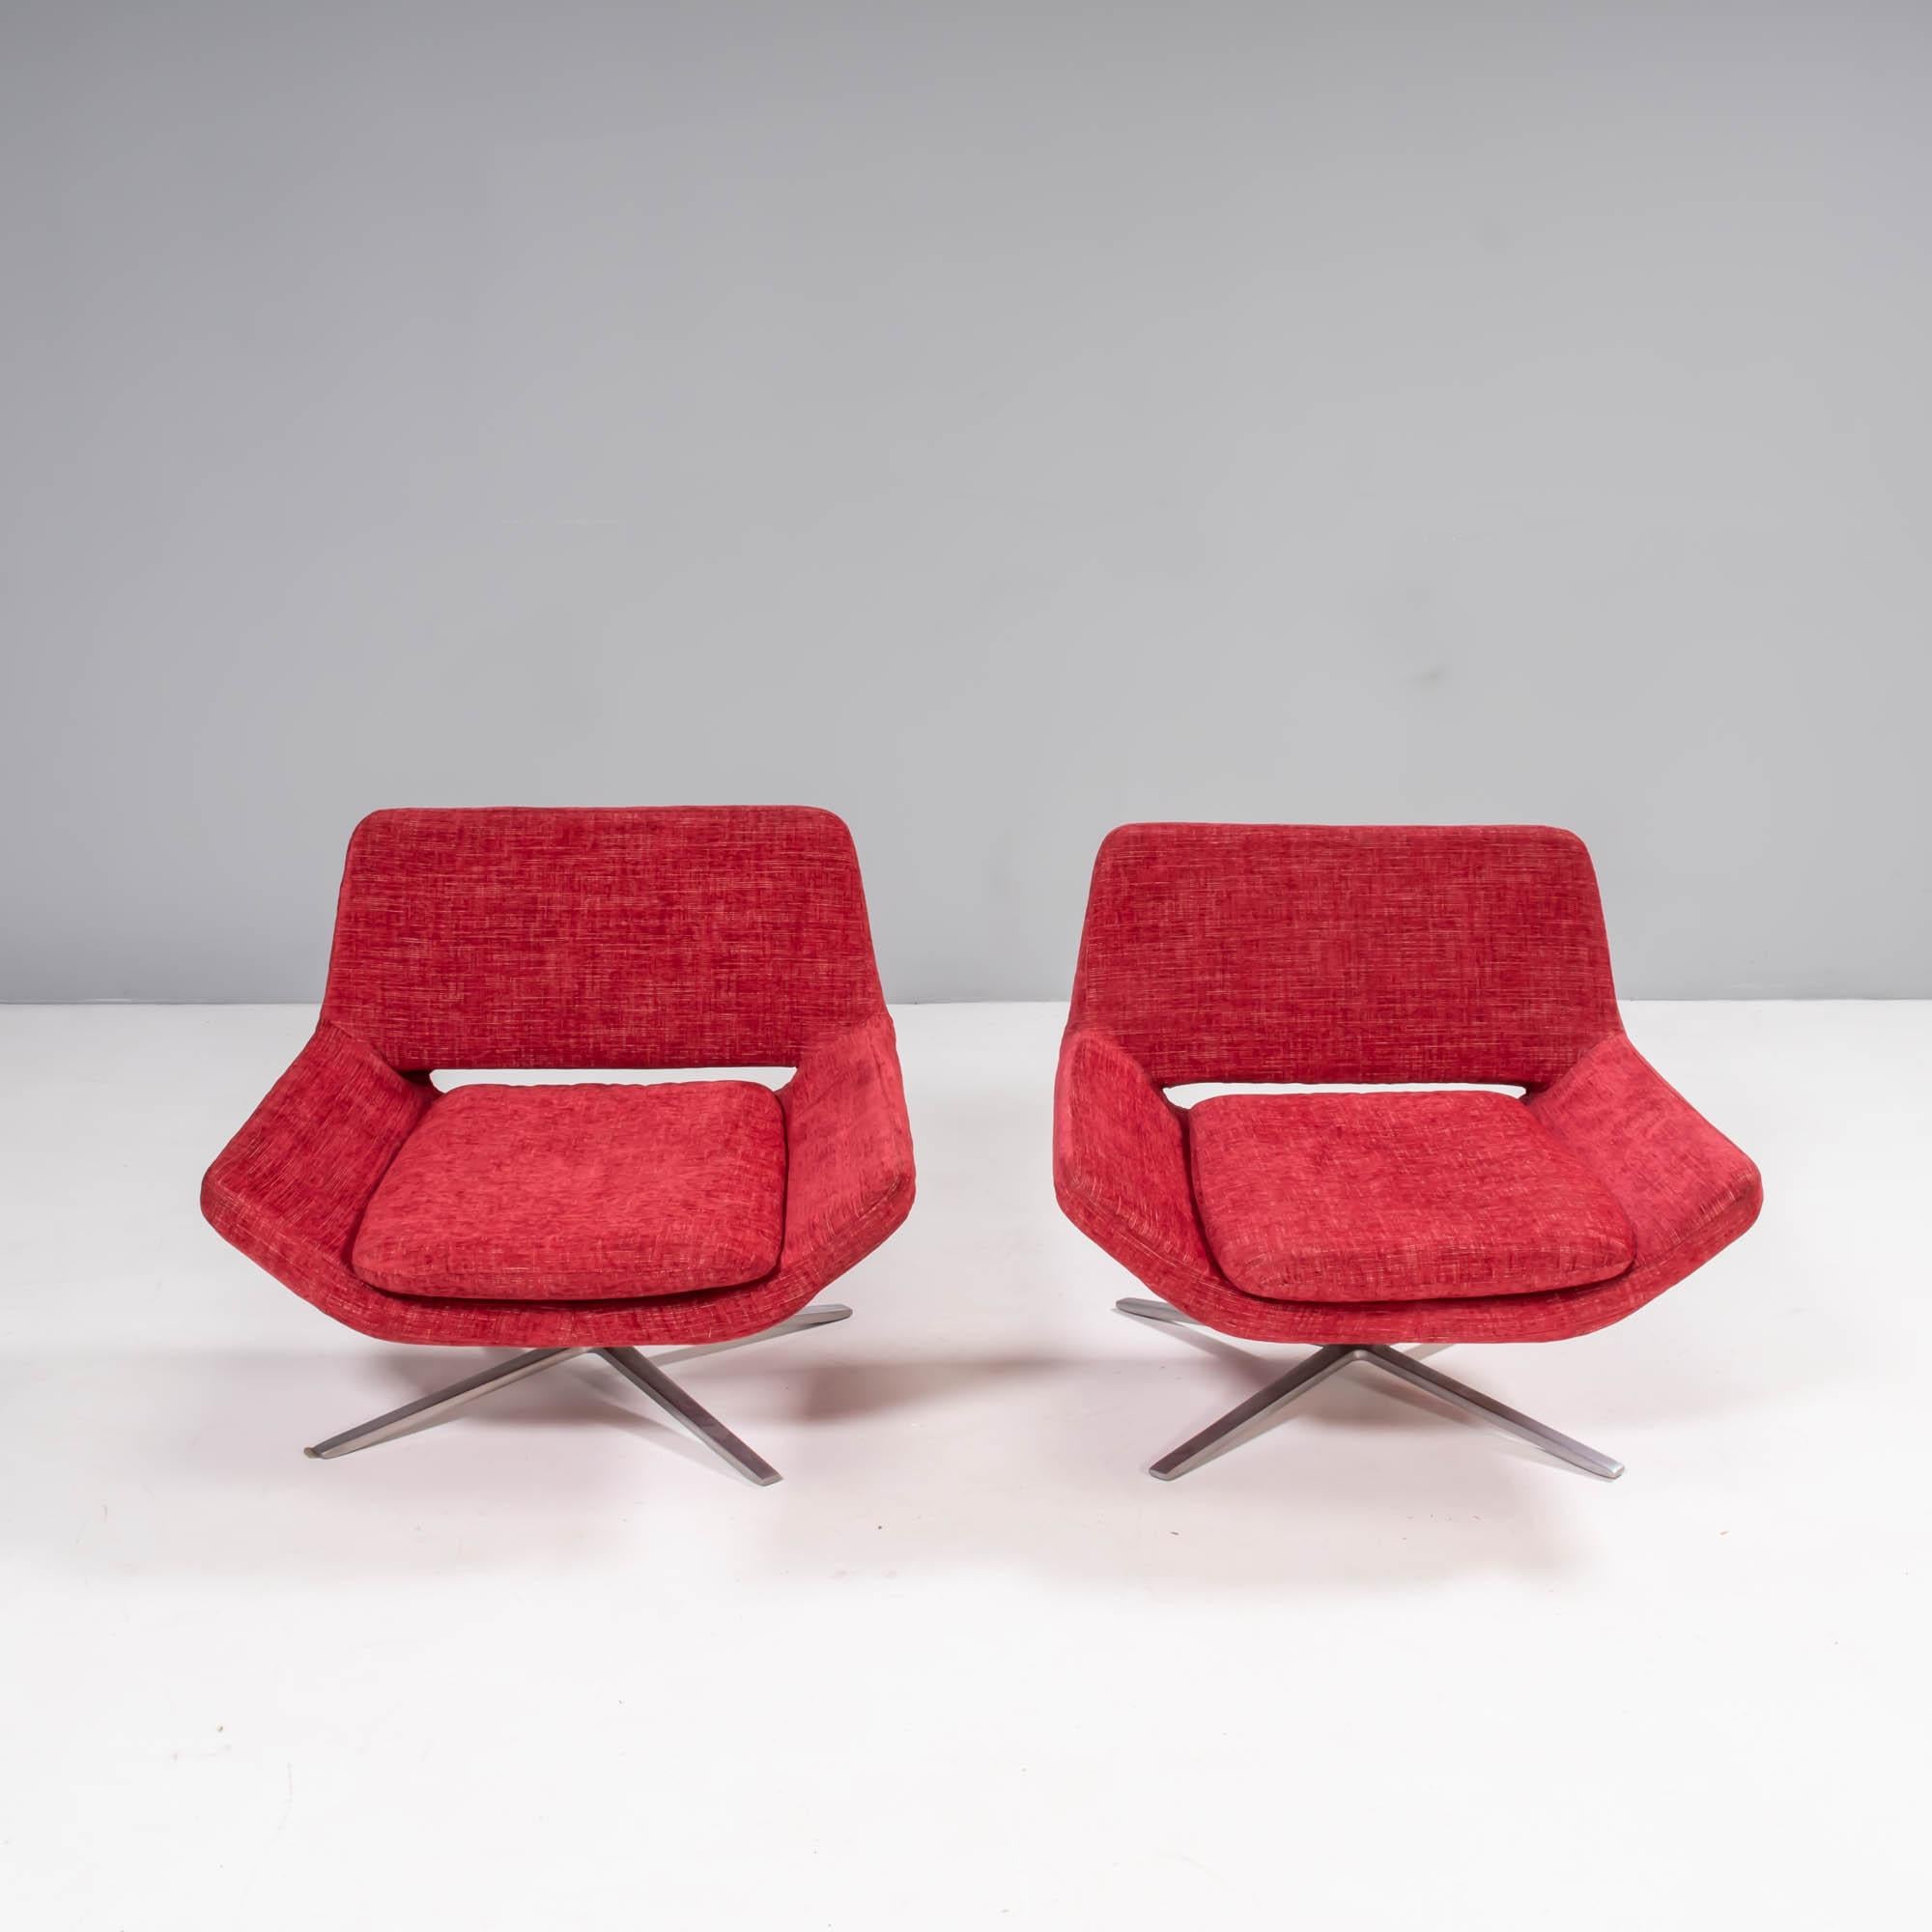 Originally designed in 2002 by Jeffrey Bernett for B&B Italia, this pair of Metropolitan armchairs have a sleek, modernist aesthetic. 

Upholstered in their original red tweed fabric, the armchairs feature seats that flow uninterruptedly into